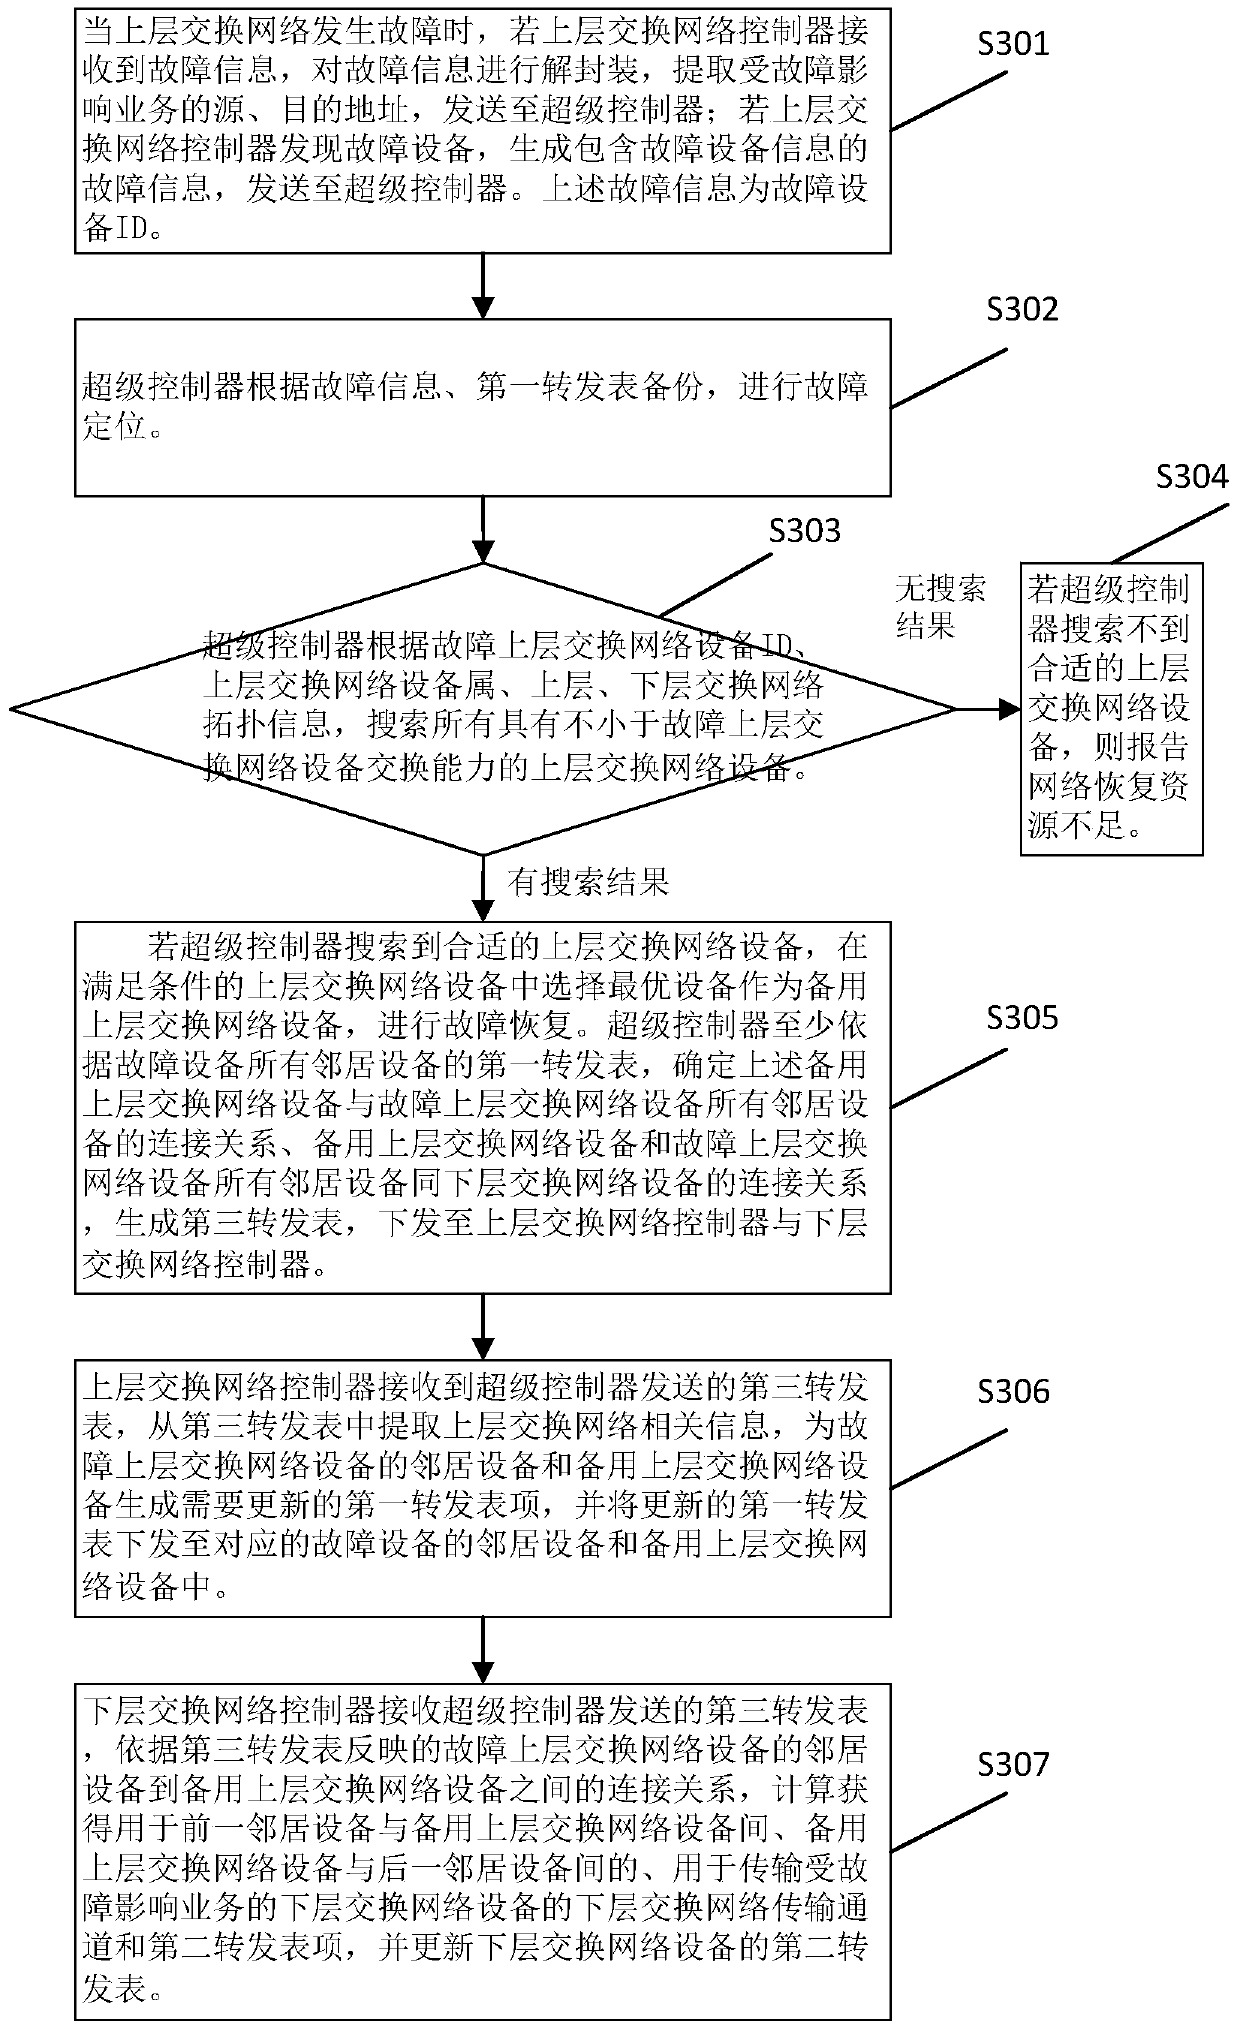 Cross-layer network fault recovery system and method based on configuration migration